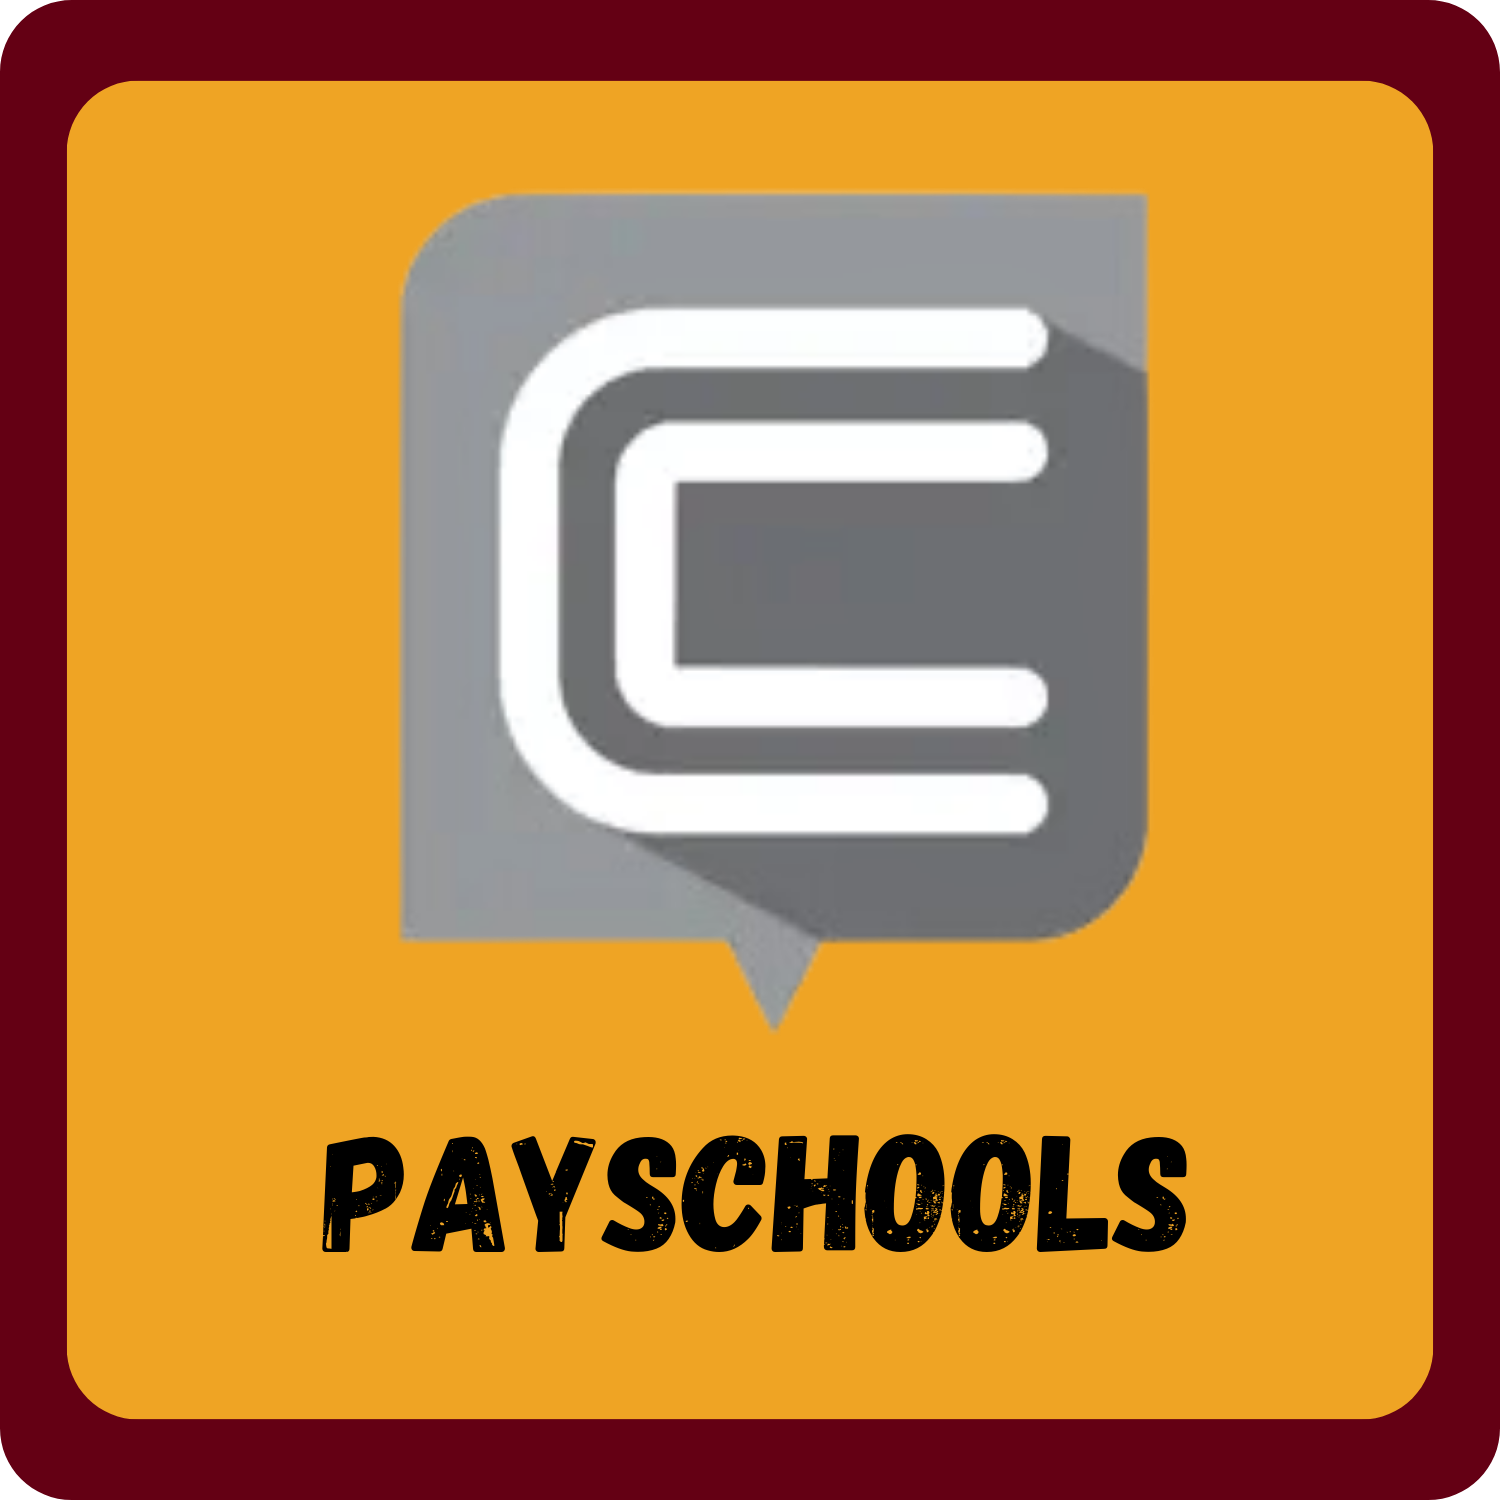 PaySchools (opens new site in new tab)